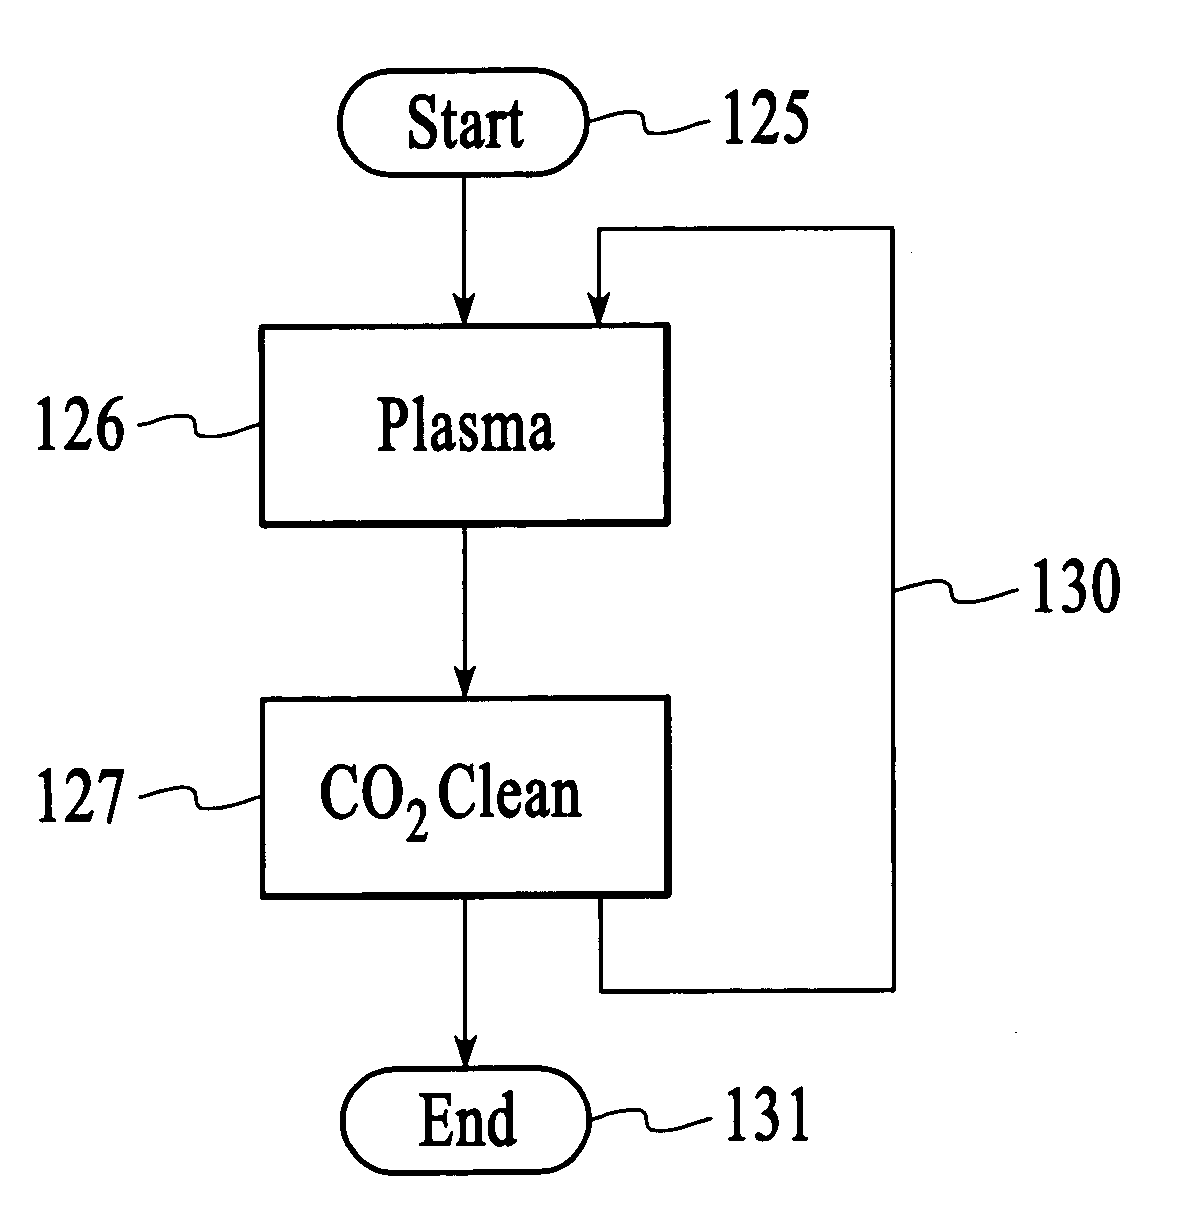 Methods for resist stripping and other processes for cleaning surfaces substantially free of contaminants